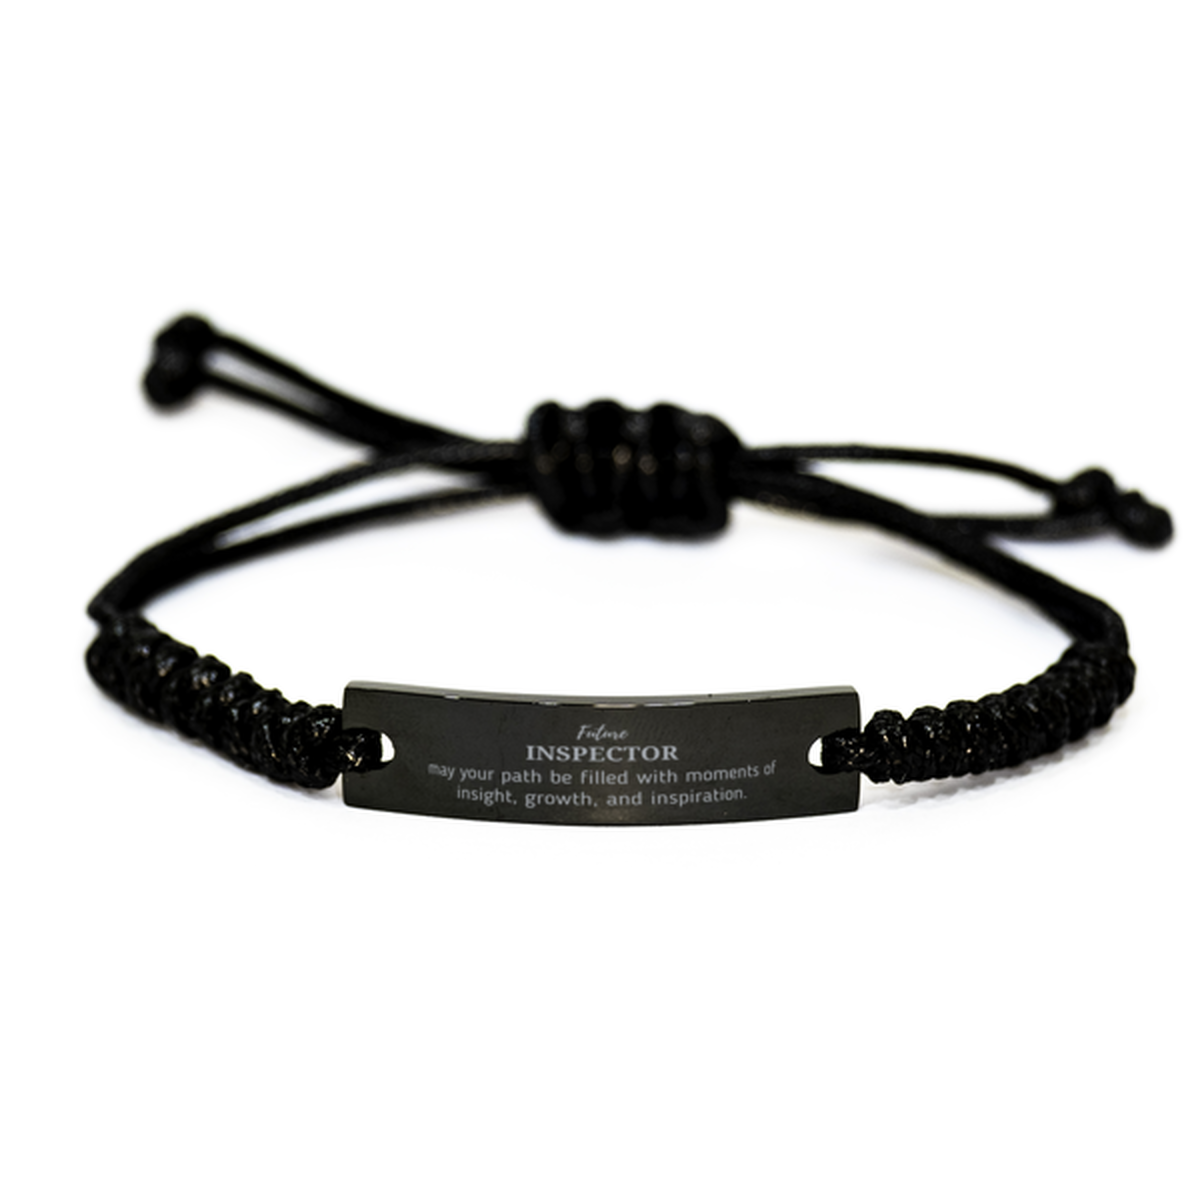 Future Inspector Gifts, May your path be filled with moments of insight, Graduation Gifts for New Inspector, Christmas Unique Black Rope Bracelet For Men, Women, Friends